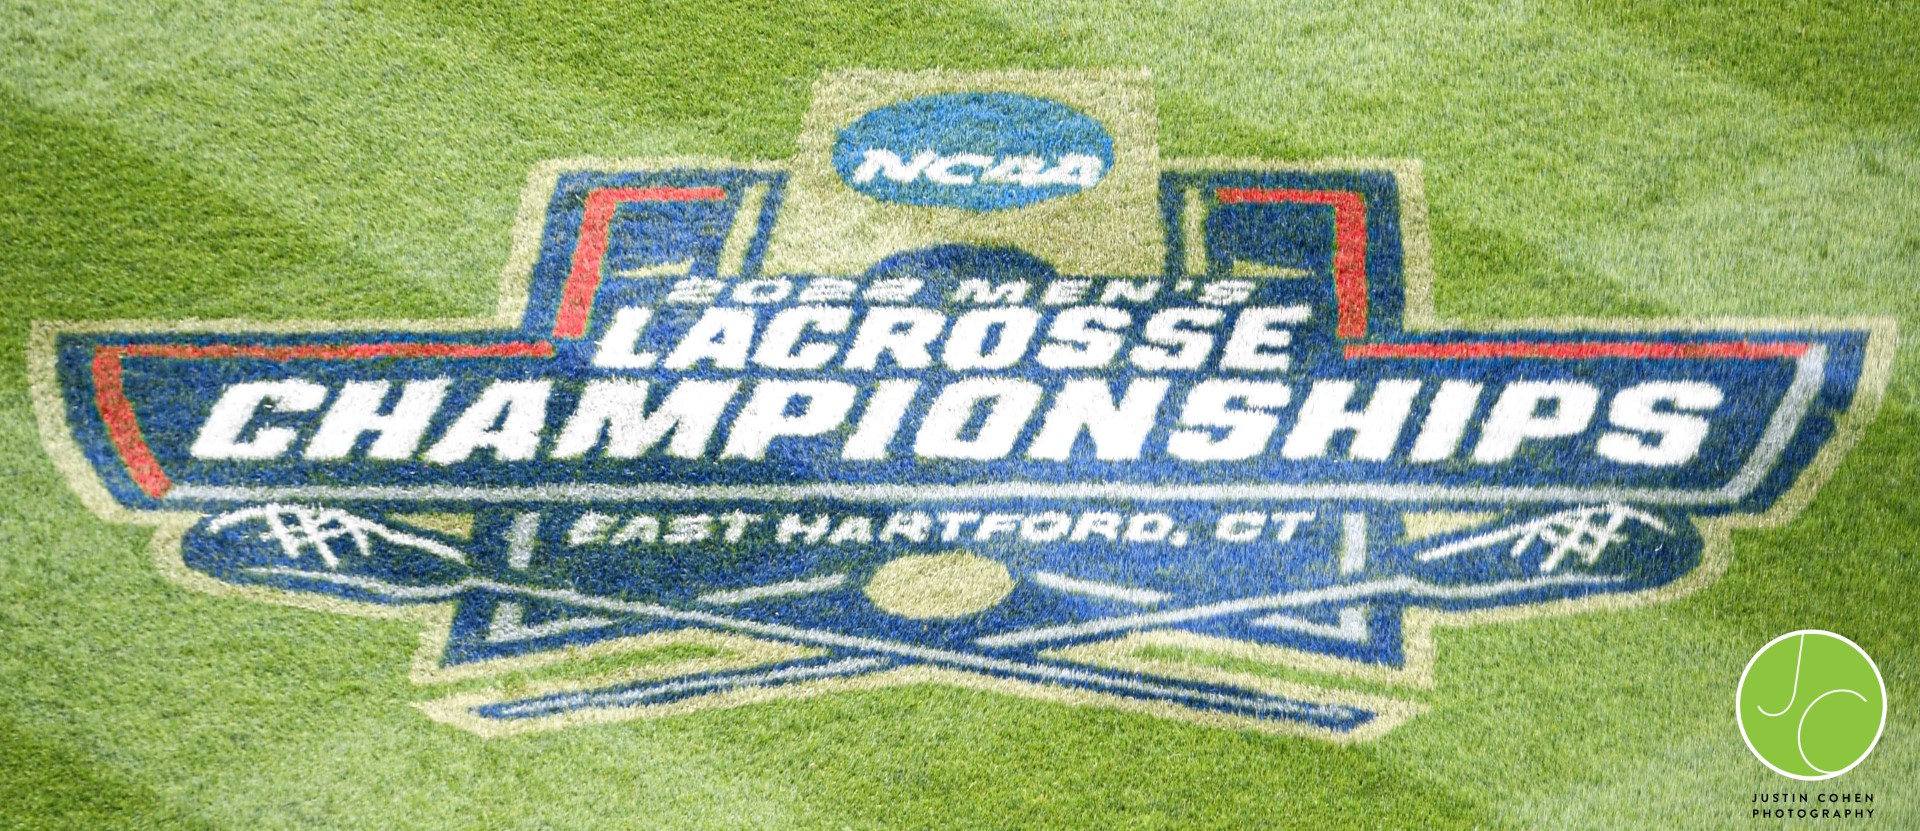 NCAA Lacrosse Championship Game Field Branding_May-30_2022_Justin Cohen Photography